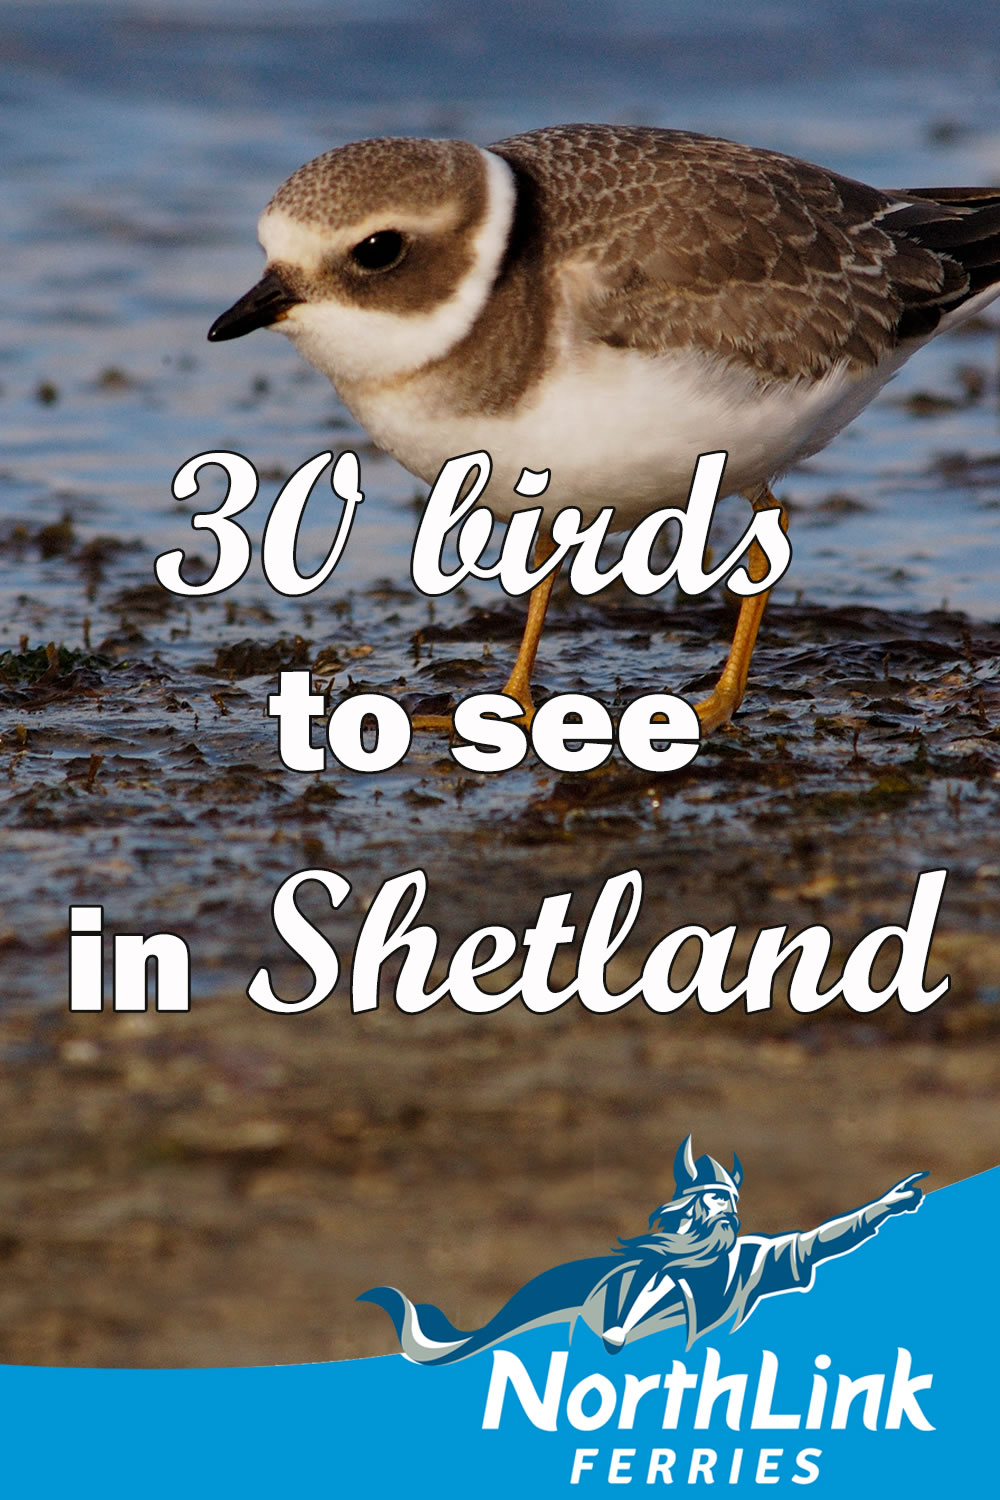 30 birds to see in Shetland